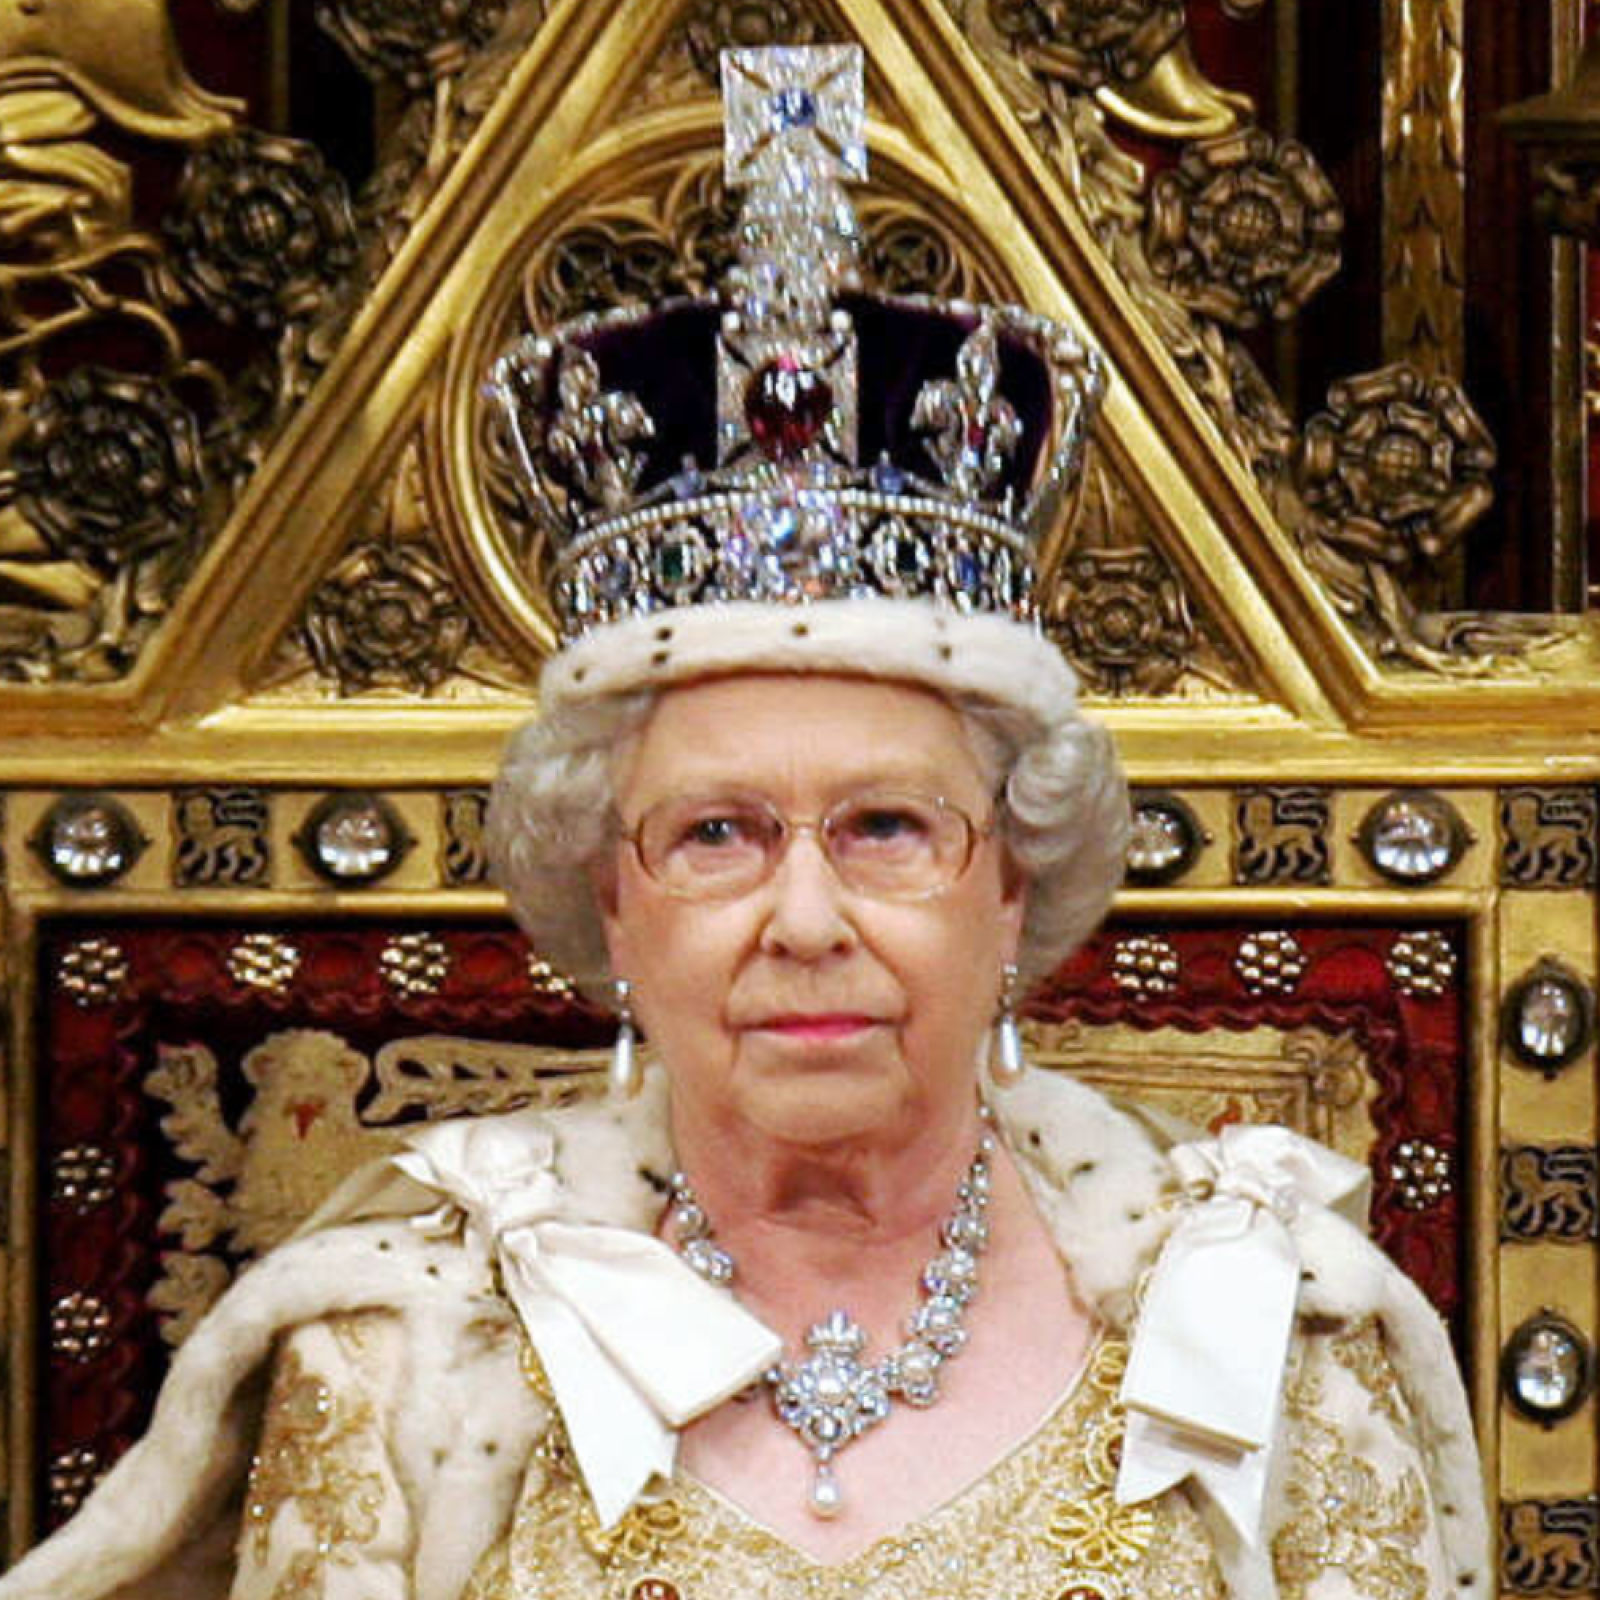 Queen Elizabeth's Tip For Wearing Crown May Be Warning for King